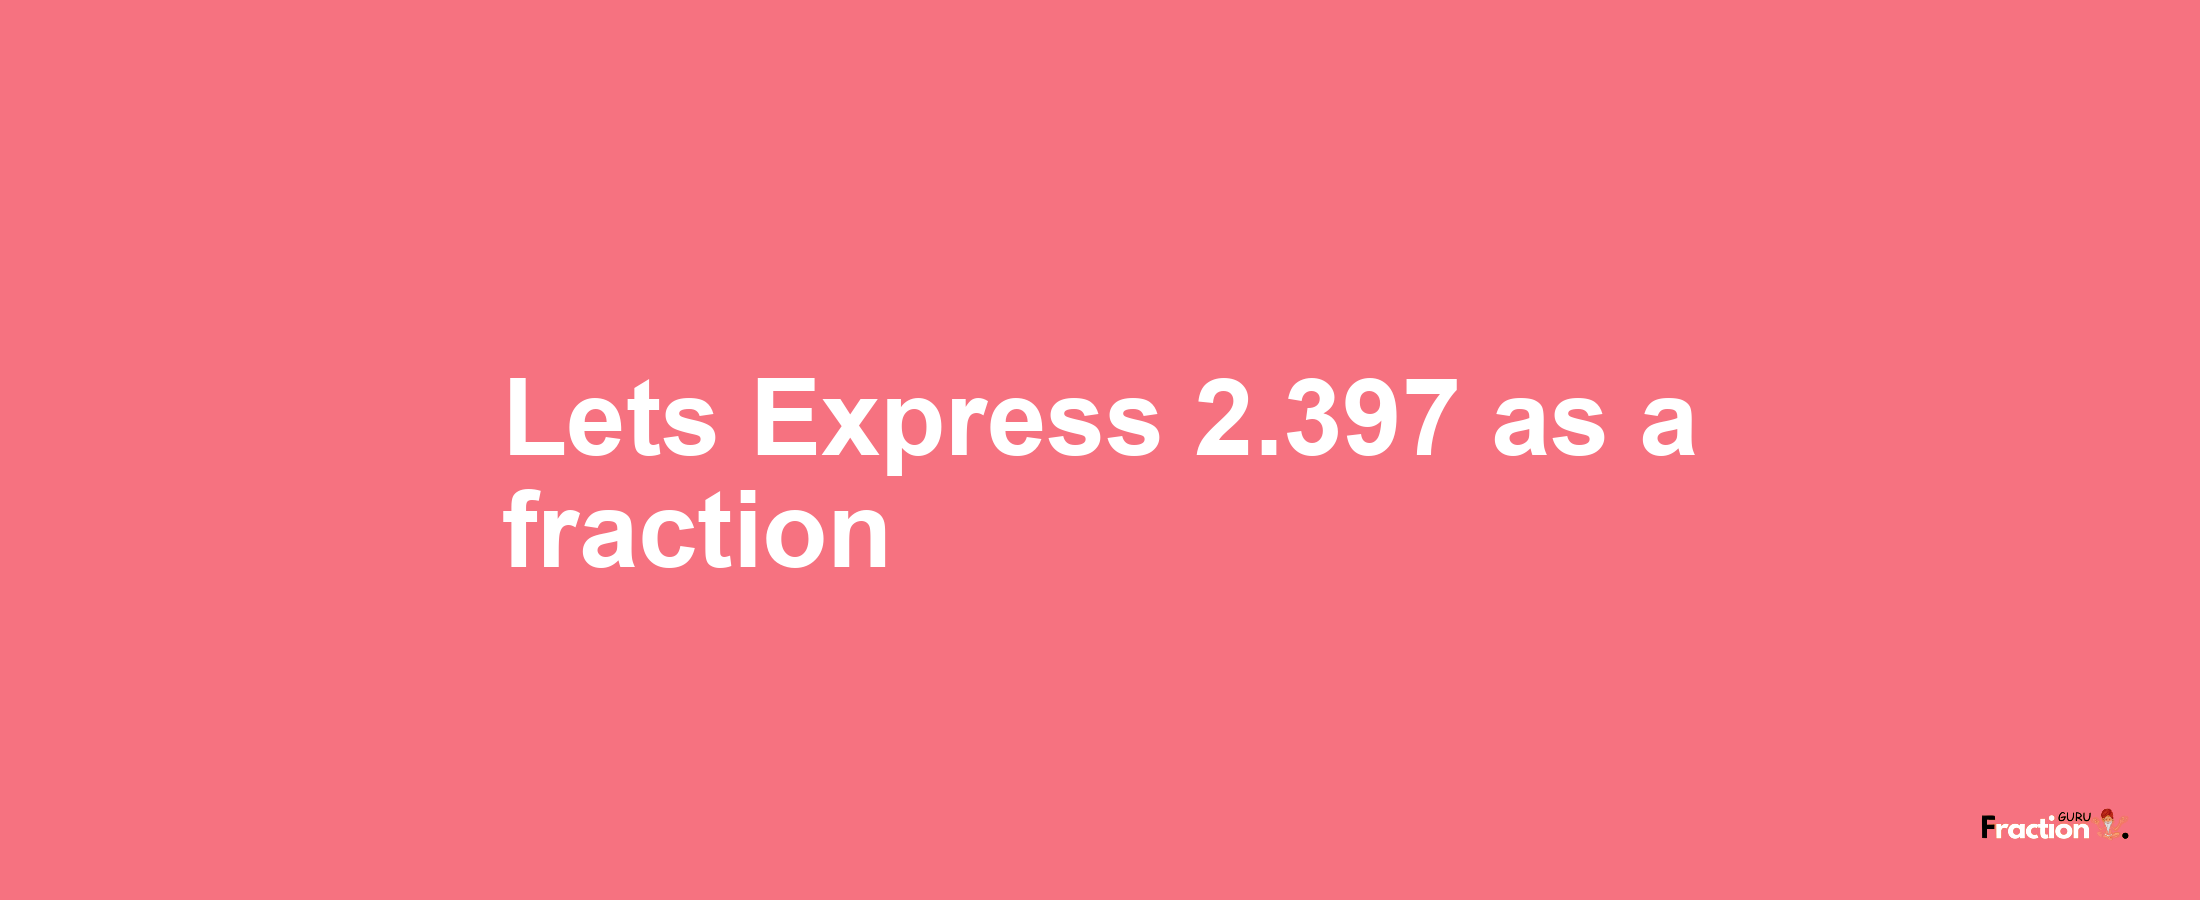 Lets Express 2.397 as afraction